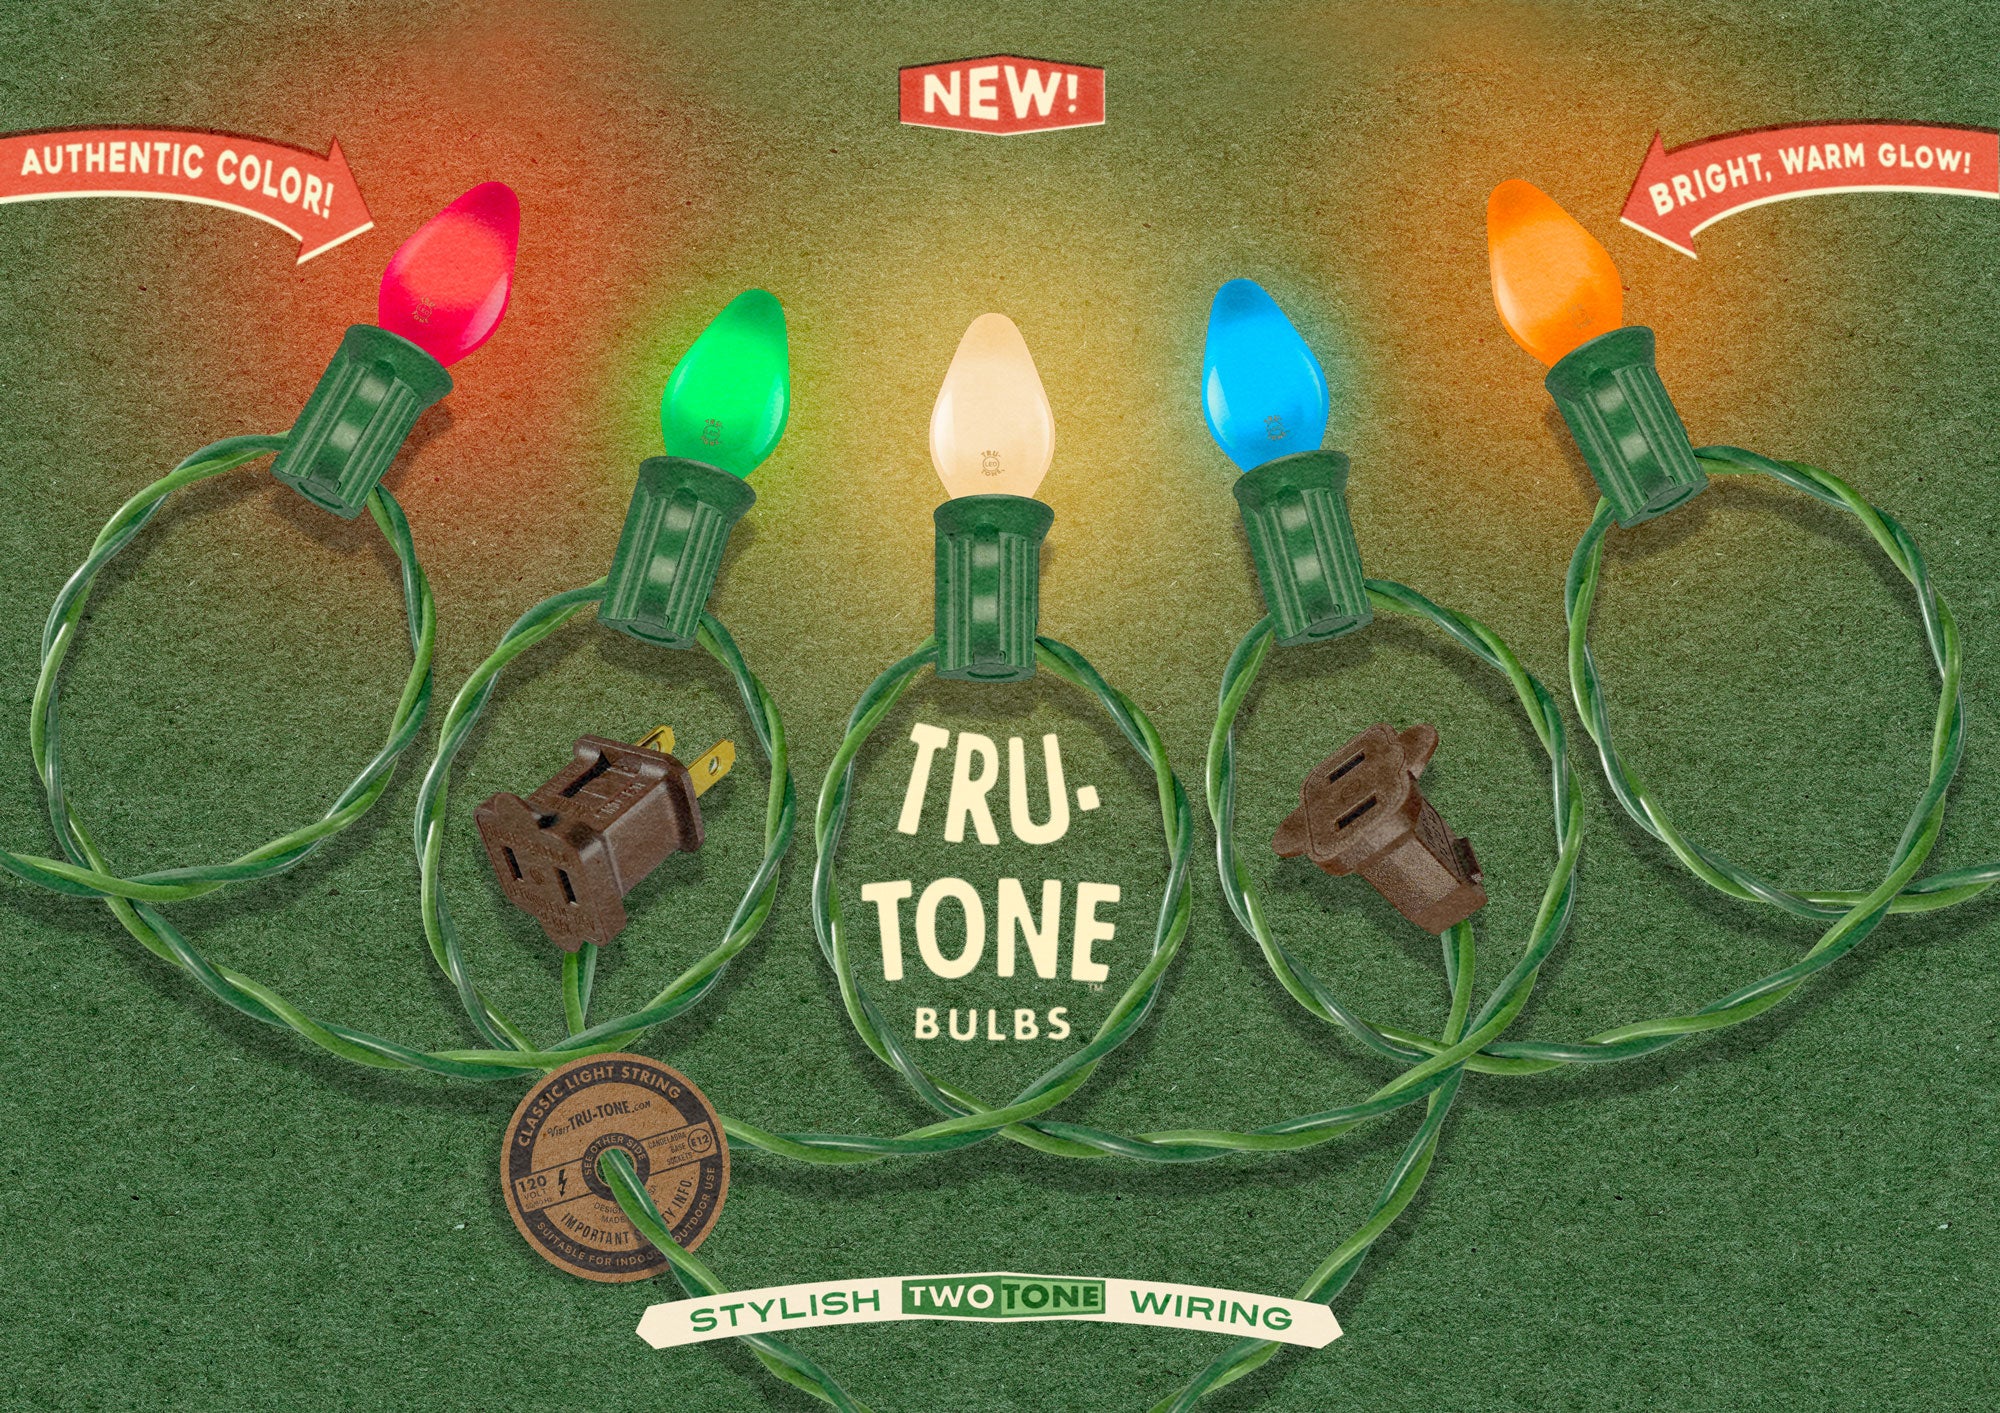 Tru-Tone LED Light Bulbs - Christmas lights and light stings that look just like vintage incandescent bulbs with authentic color and a bright warm glow!